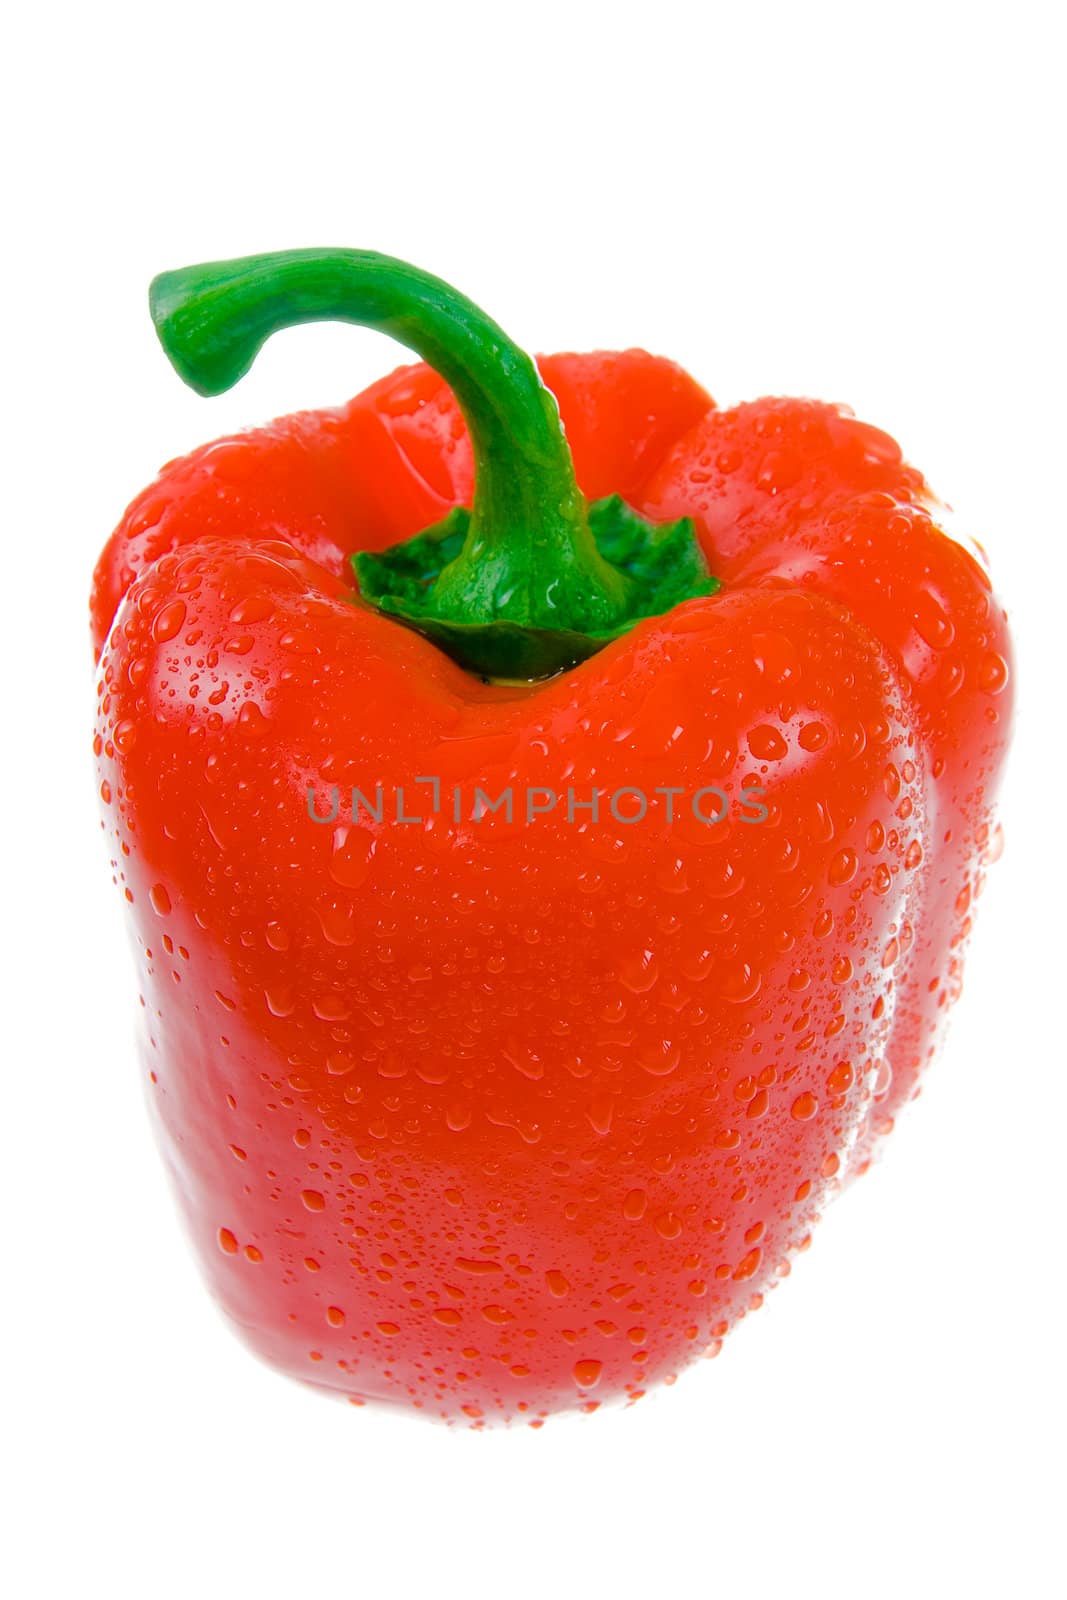 Red Bell Pepper. Close-up by Sergius